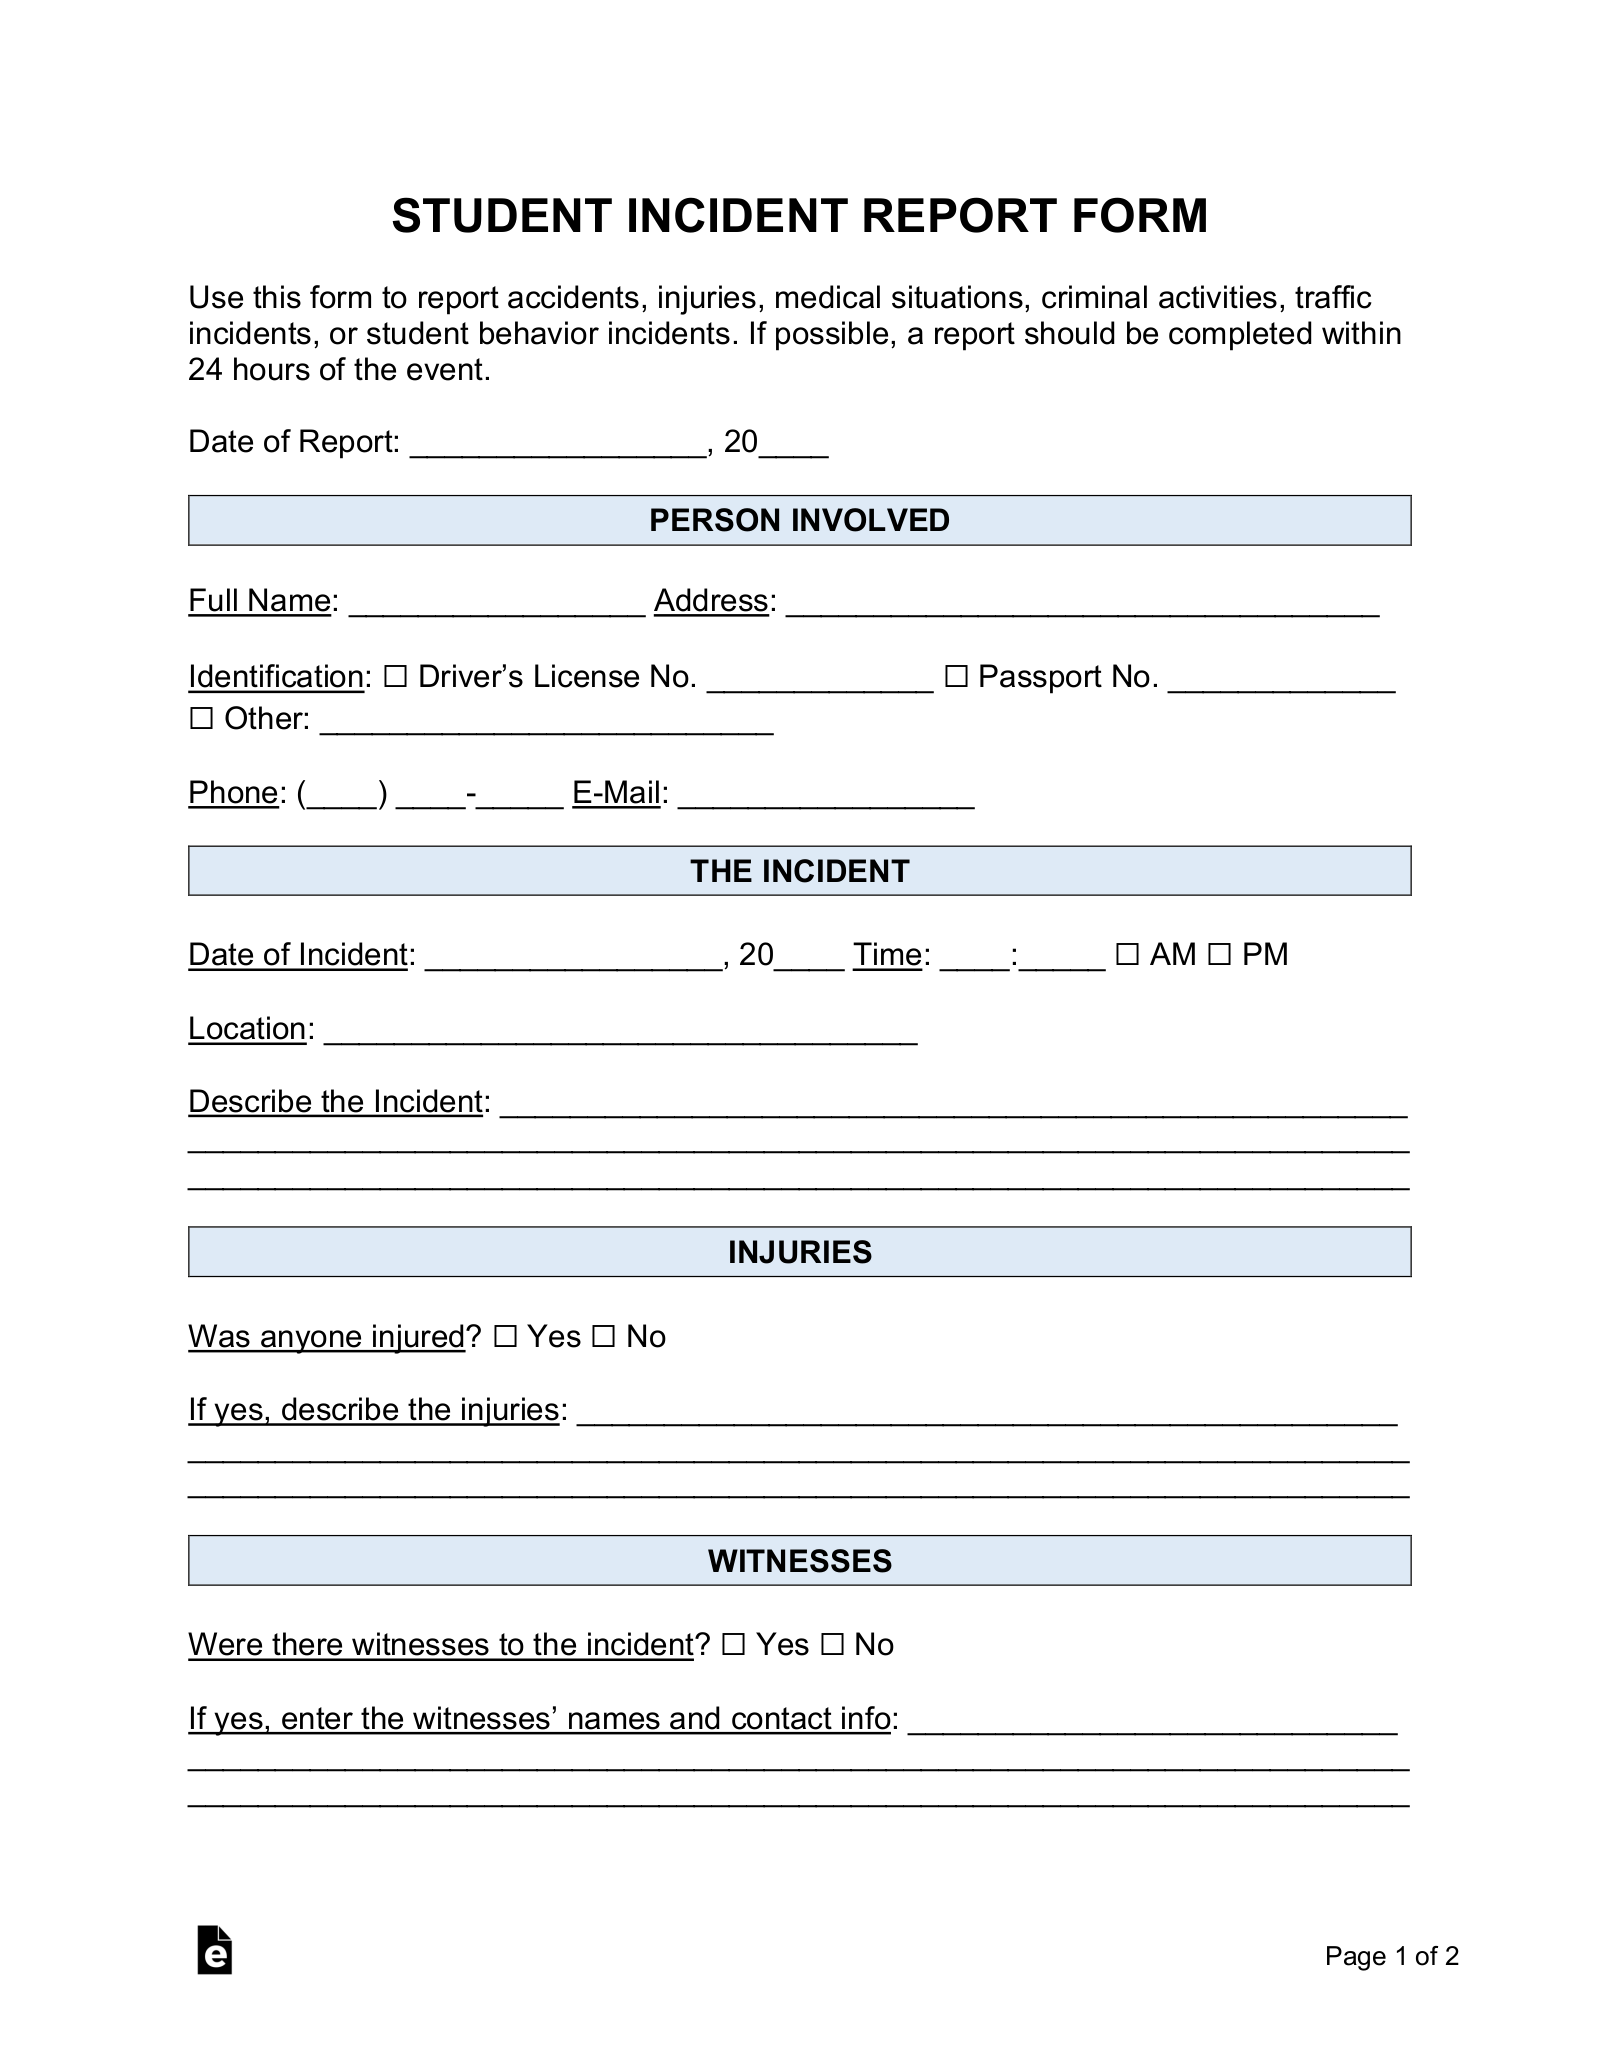 Student Incident Report Template